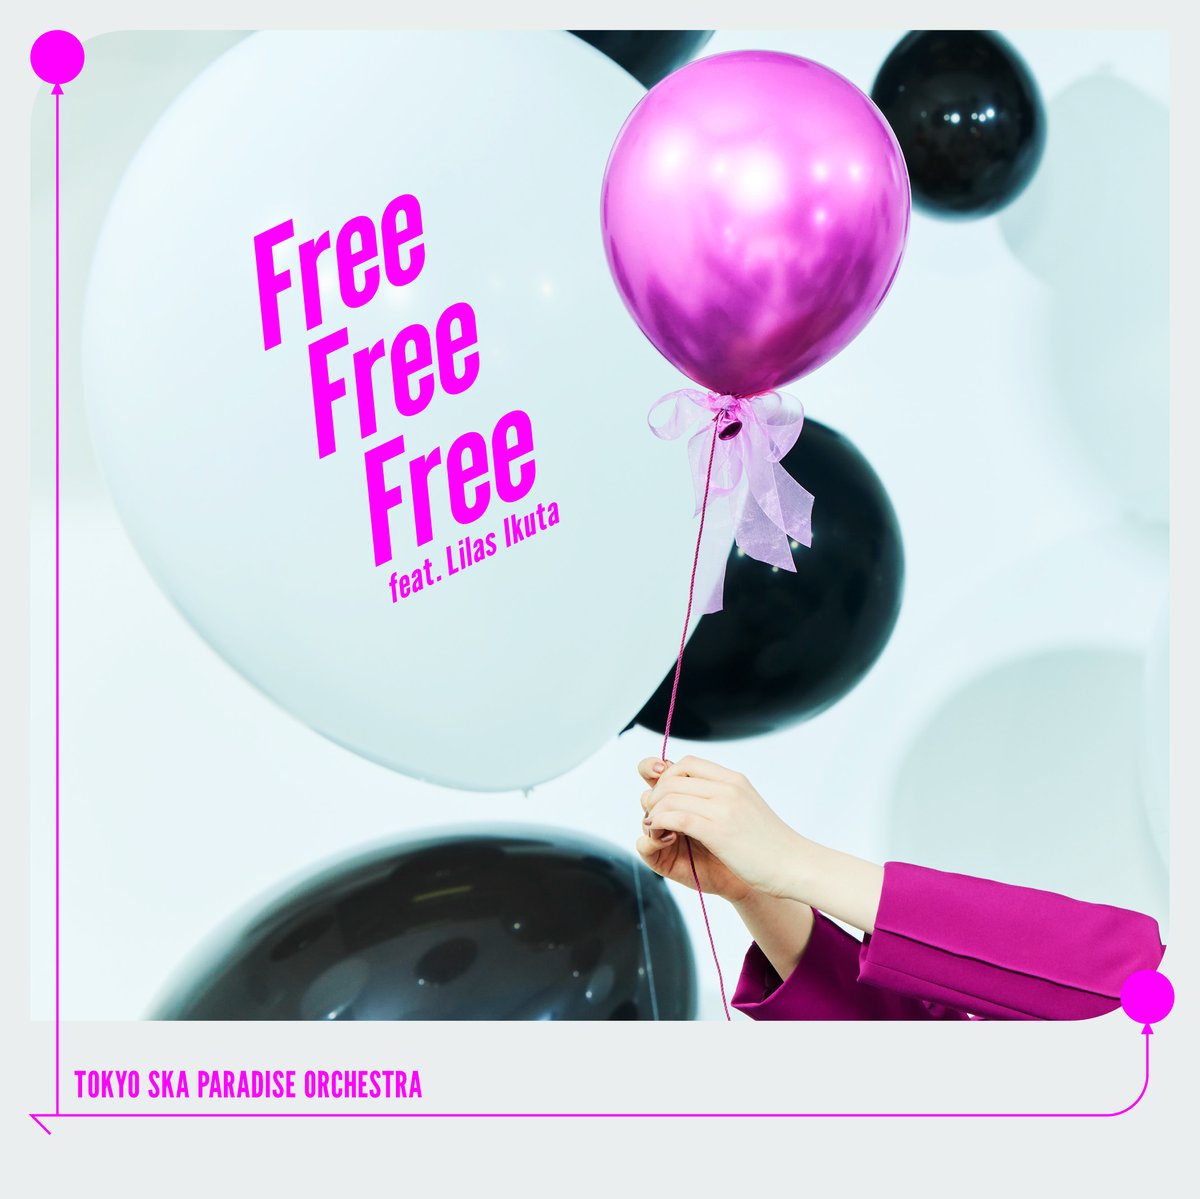 Cover art for『TOKYO SKA PARADISE ORCHESTRA - Free Free Free feat.幾田りら』from the release『Free Free Free feat. Ikuta Lilas